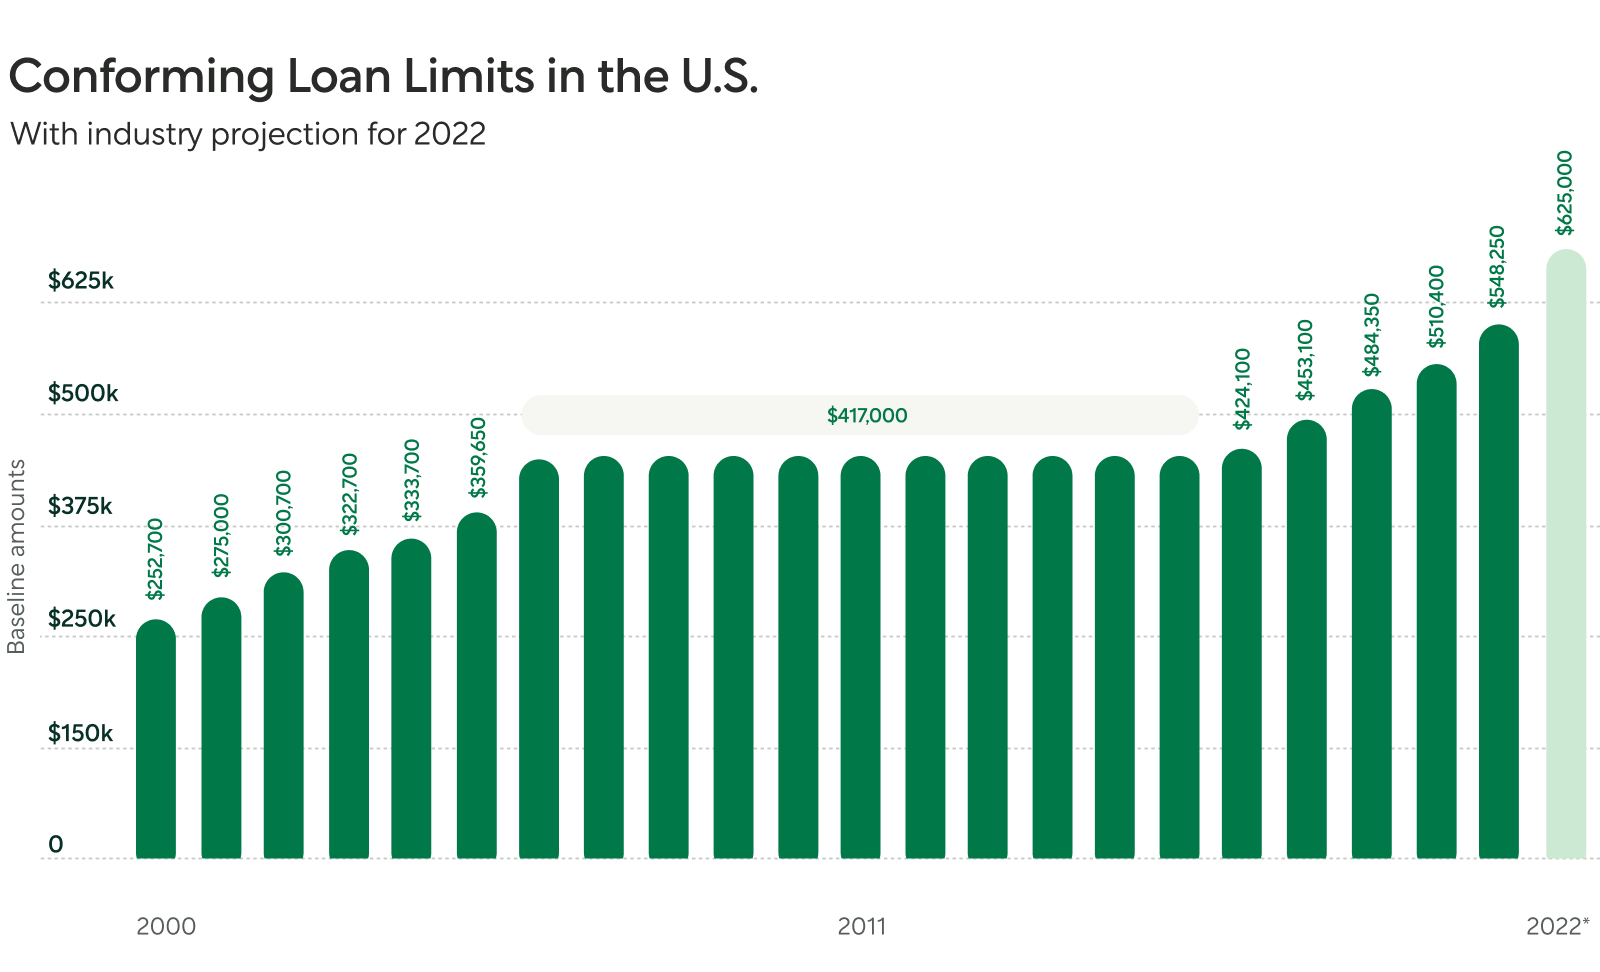 Chart Illustrating Conforming Loan Limits In The US, From 2000 to 2022